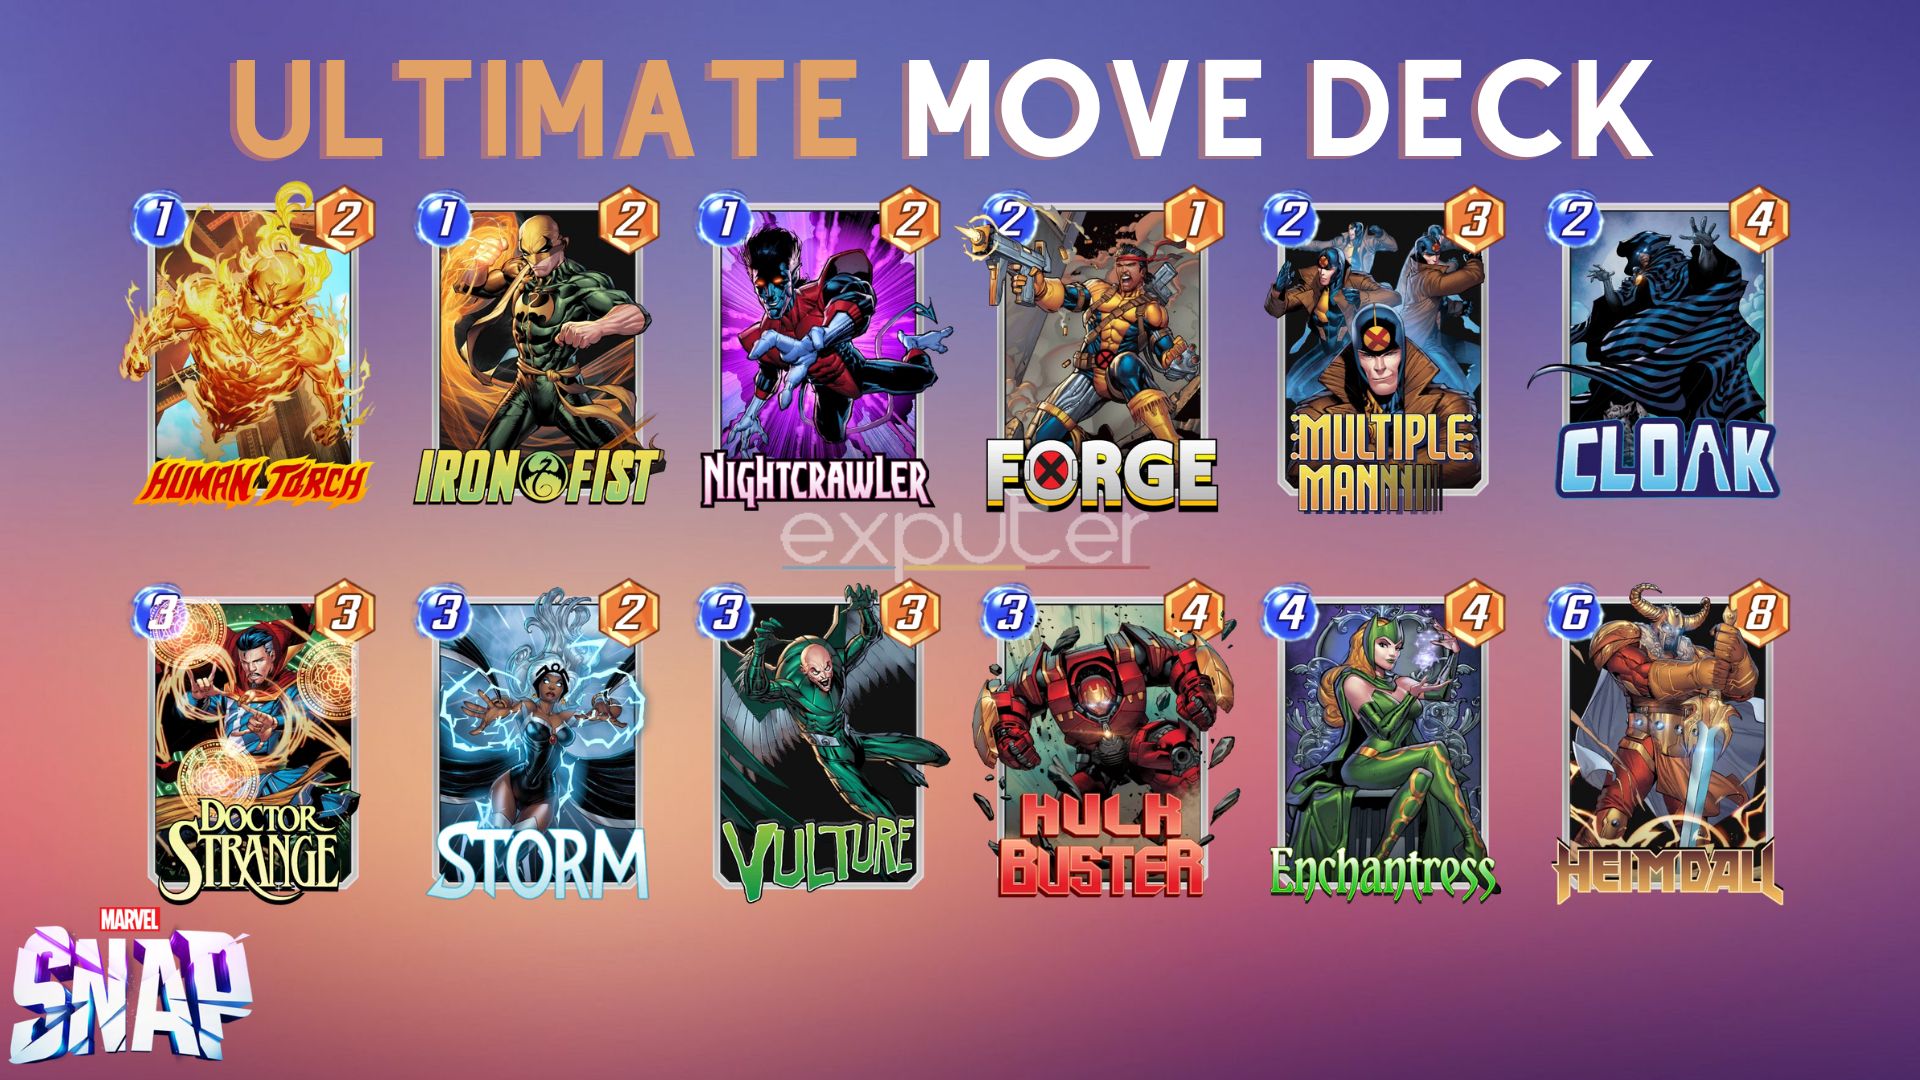 The Ultimate Move Deck in Marvel Snap.